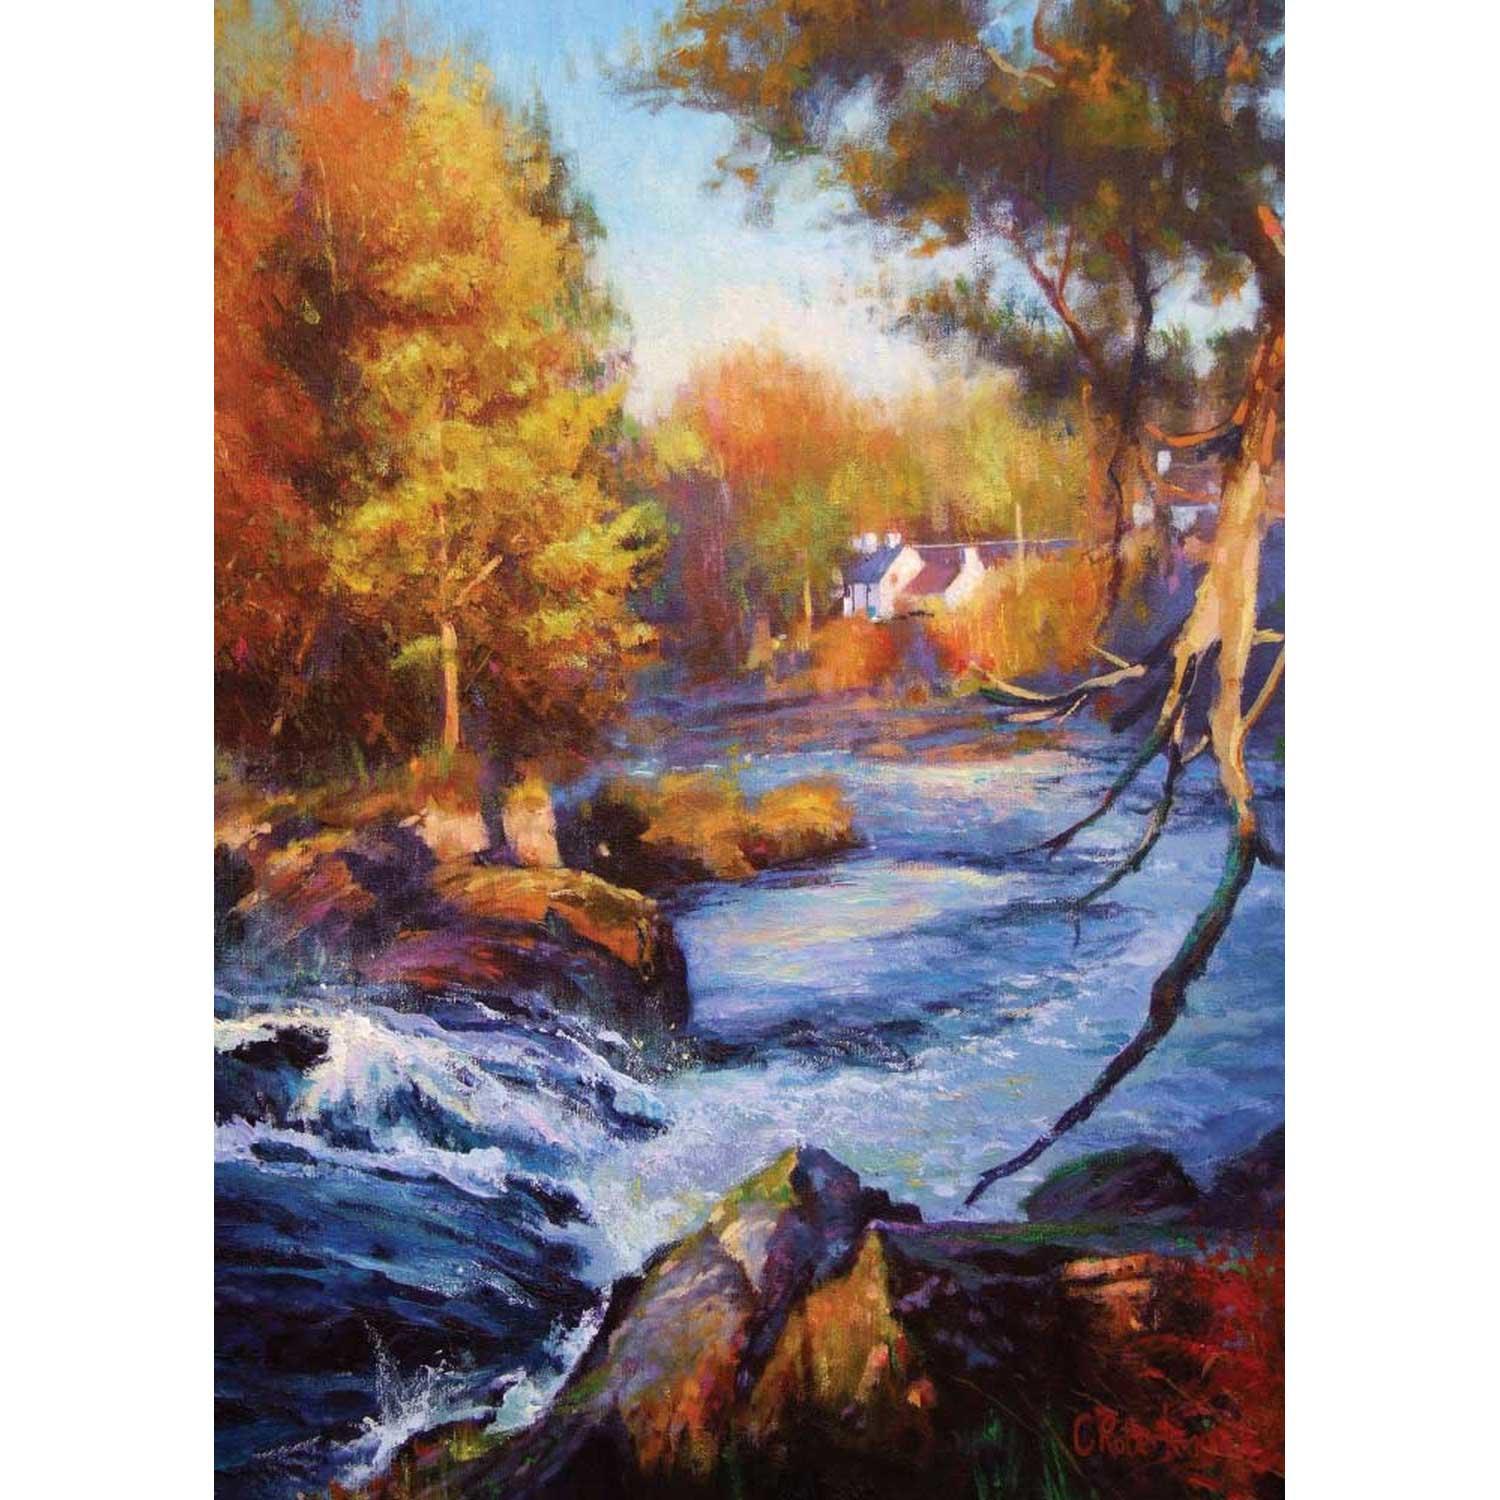 Afternoon Sunlight, Falls of Dochart by Colin Robertson